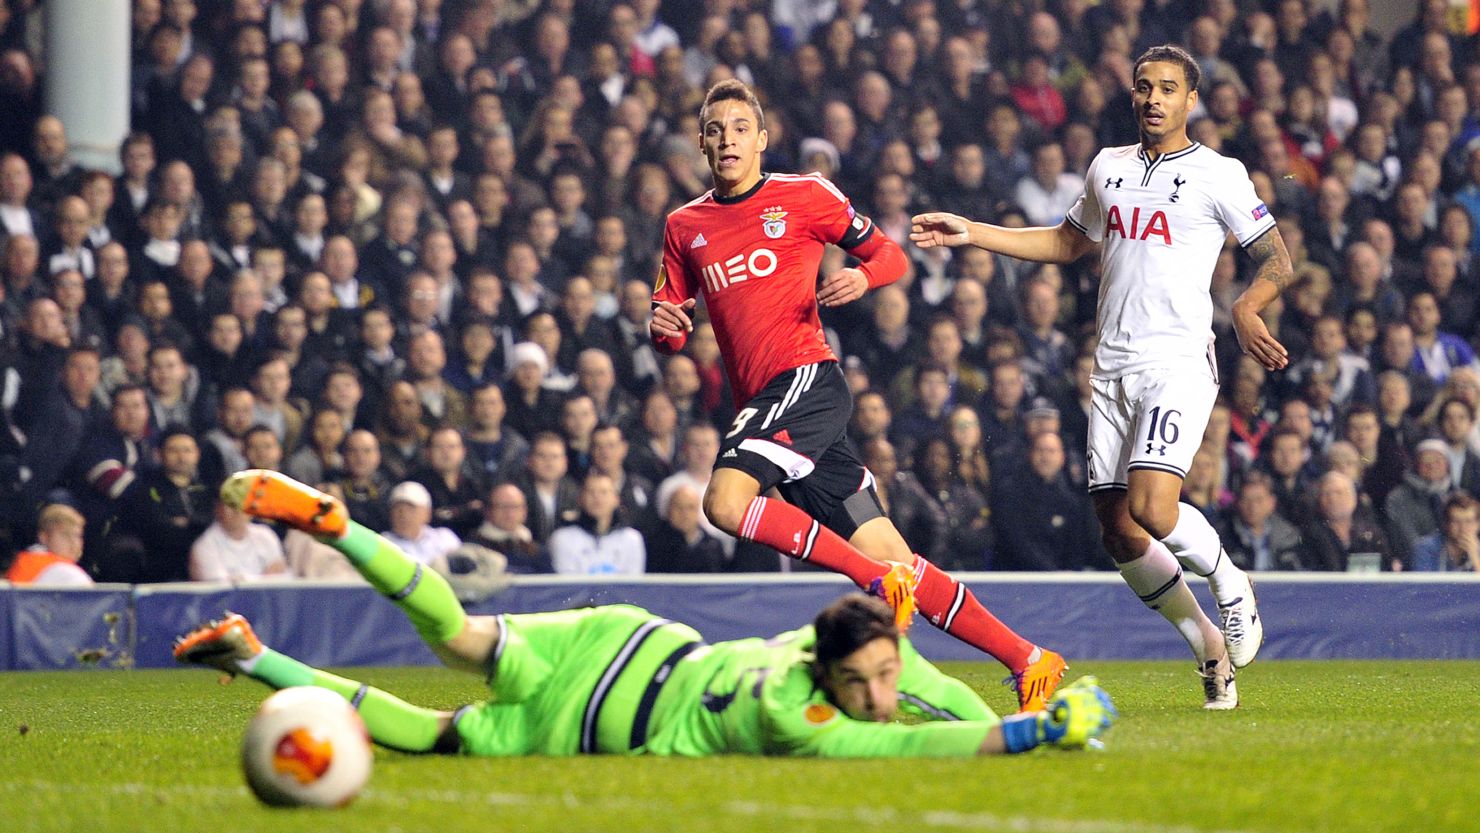 Rodrigo (center) opened the scoring for Benfica against Tottenham Hotspur in the first leg of their last 16 Europa League tie.